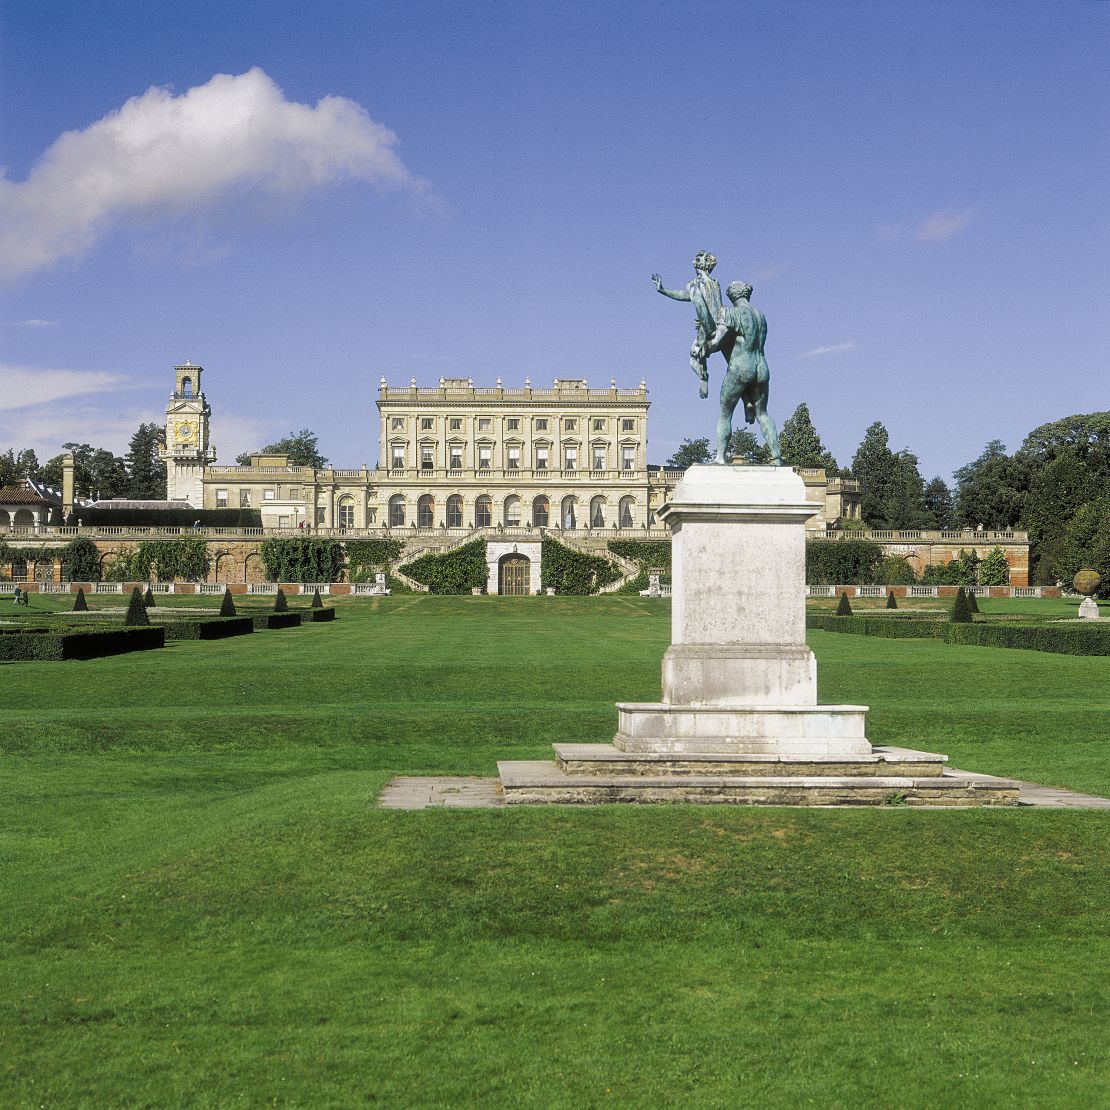 The stately Cliveden House was built in 1666 by the second Duke of Buckingham.